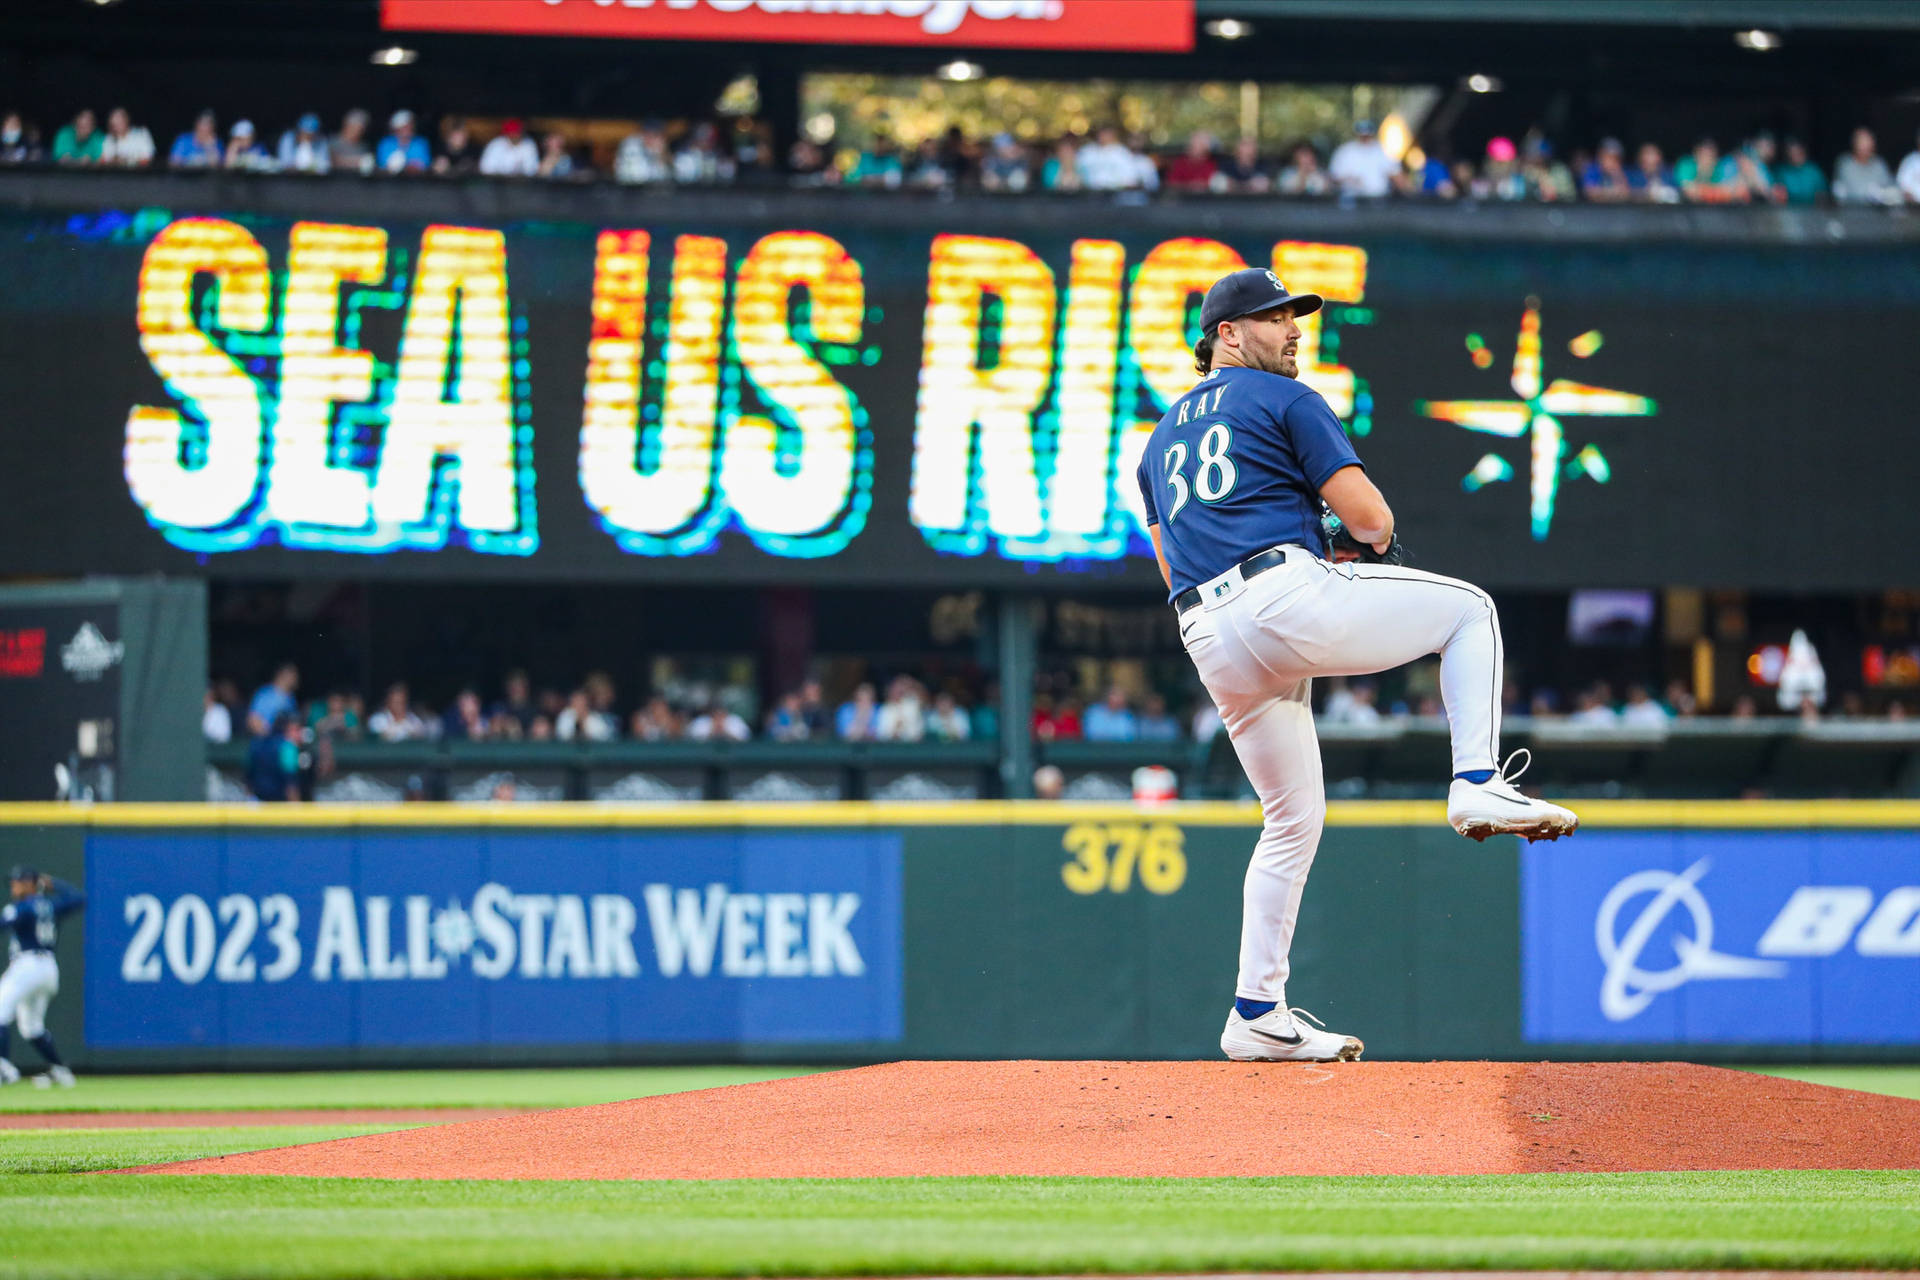 Robbie Ray in pitching position during a match Wallpaper